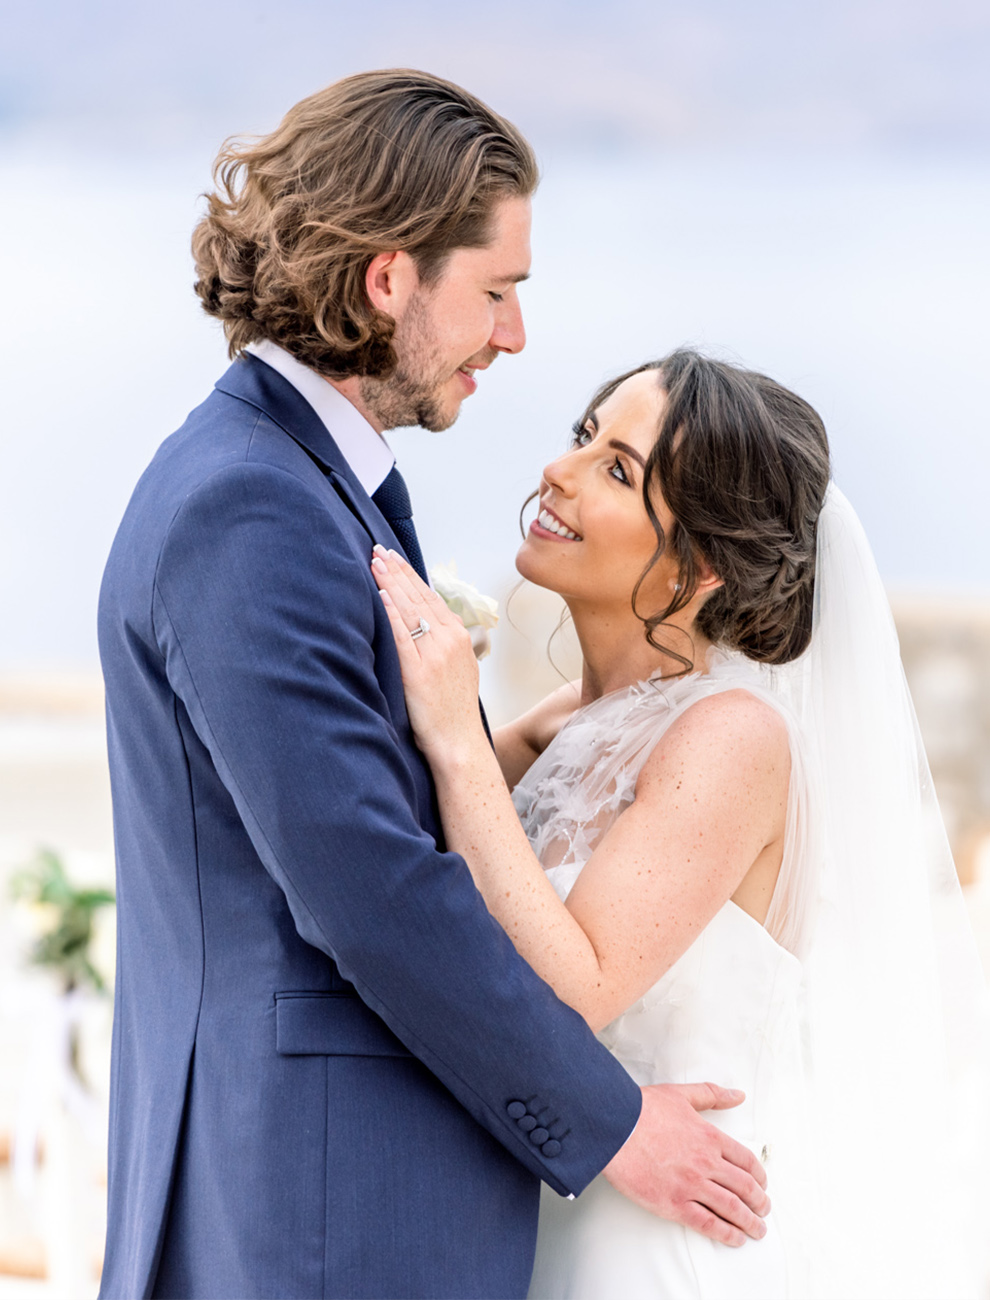 https://usercontent.one/wp/www.natalieandmax.co.uk/wp-content/uploads/2022/08/KTIMA-LINDOS-Wedding-Photographer-by-Natalie-and-Max-Photo-and-Films-Portfolio.jpg?media=1711985334